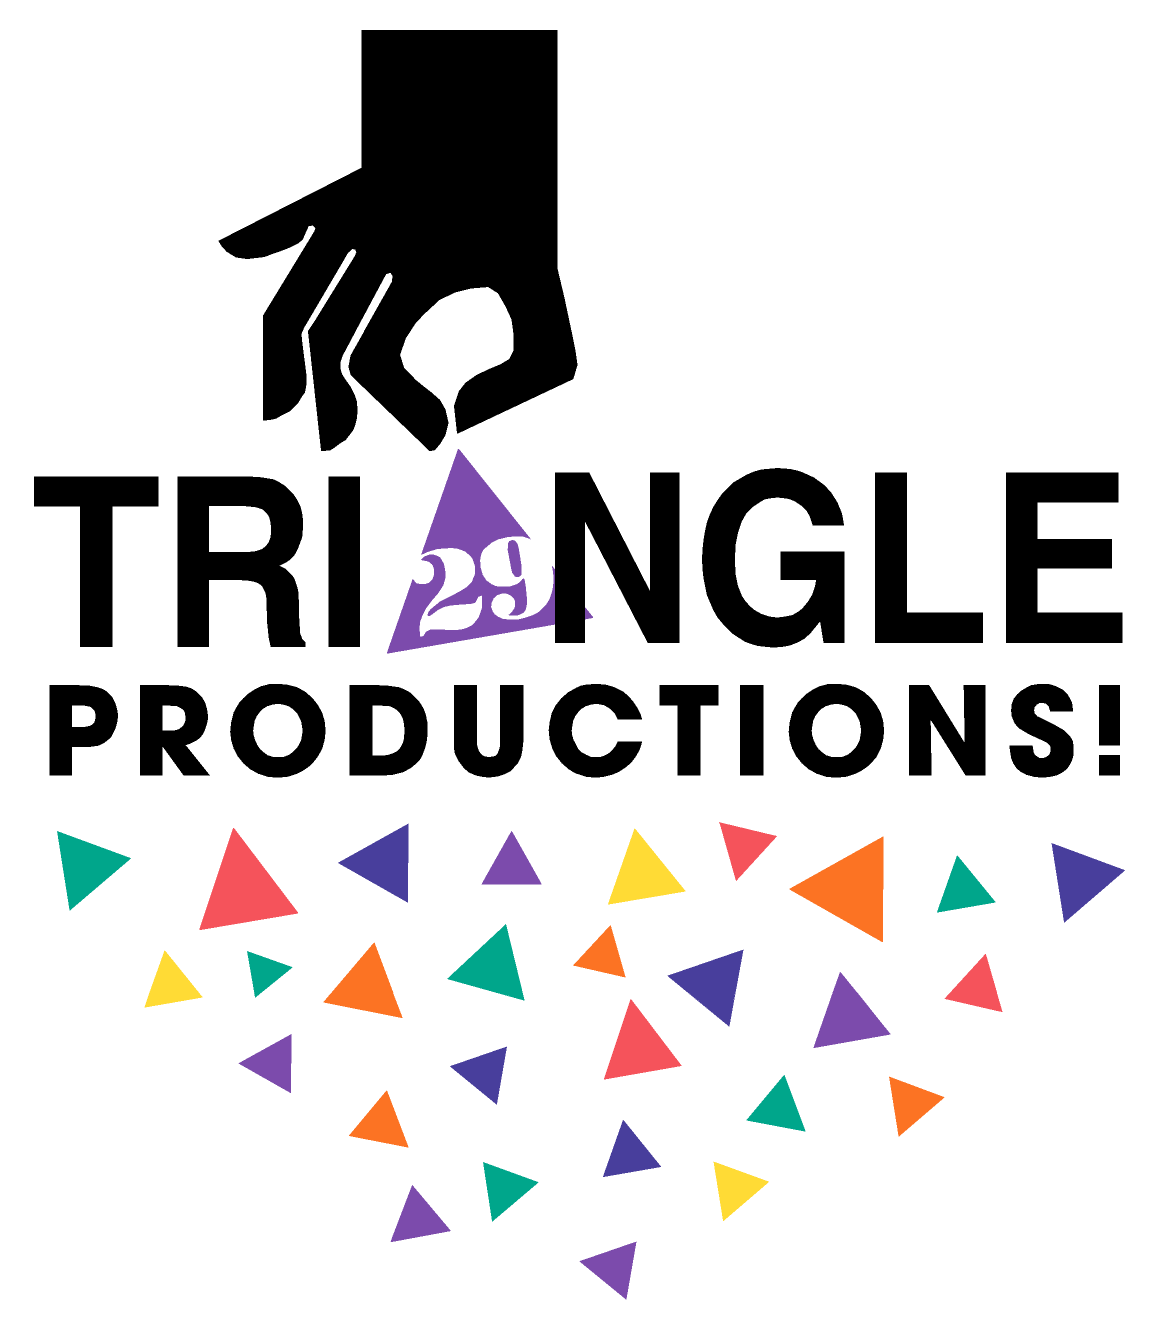 Triangle with Rooster Logo - triangle productions!